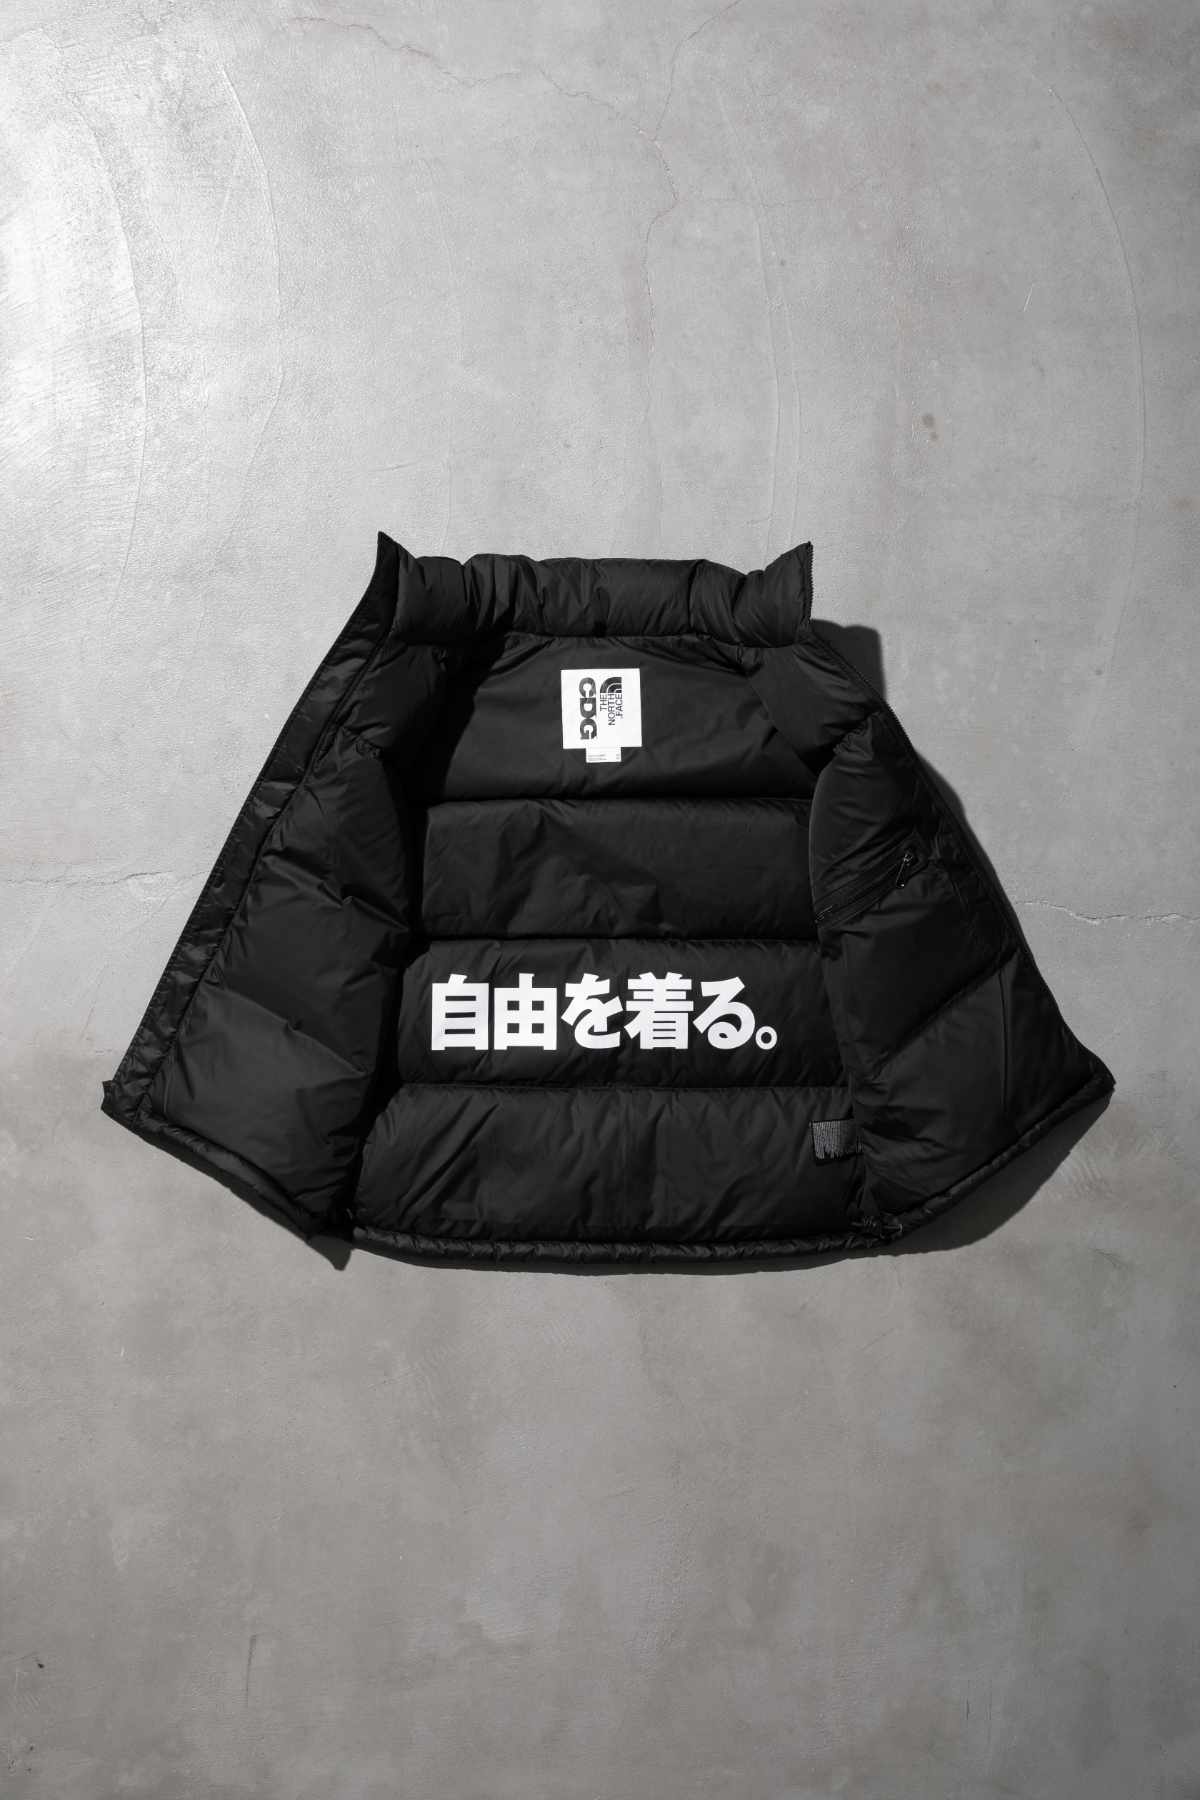 The CDG x TNF puffer vest collaboration